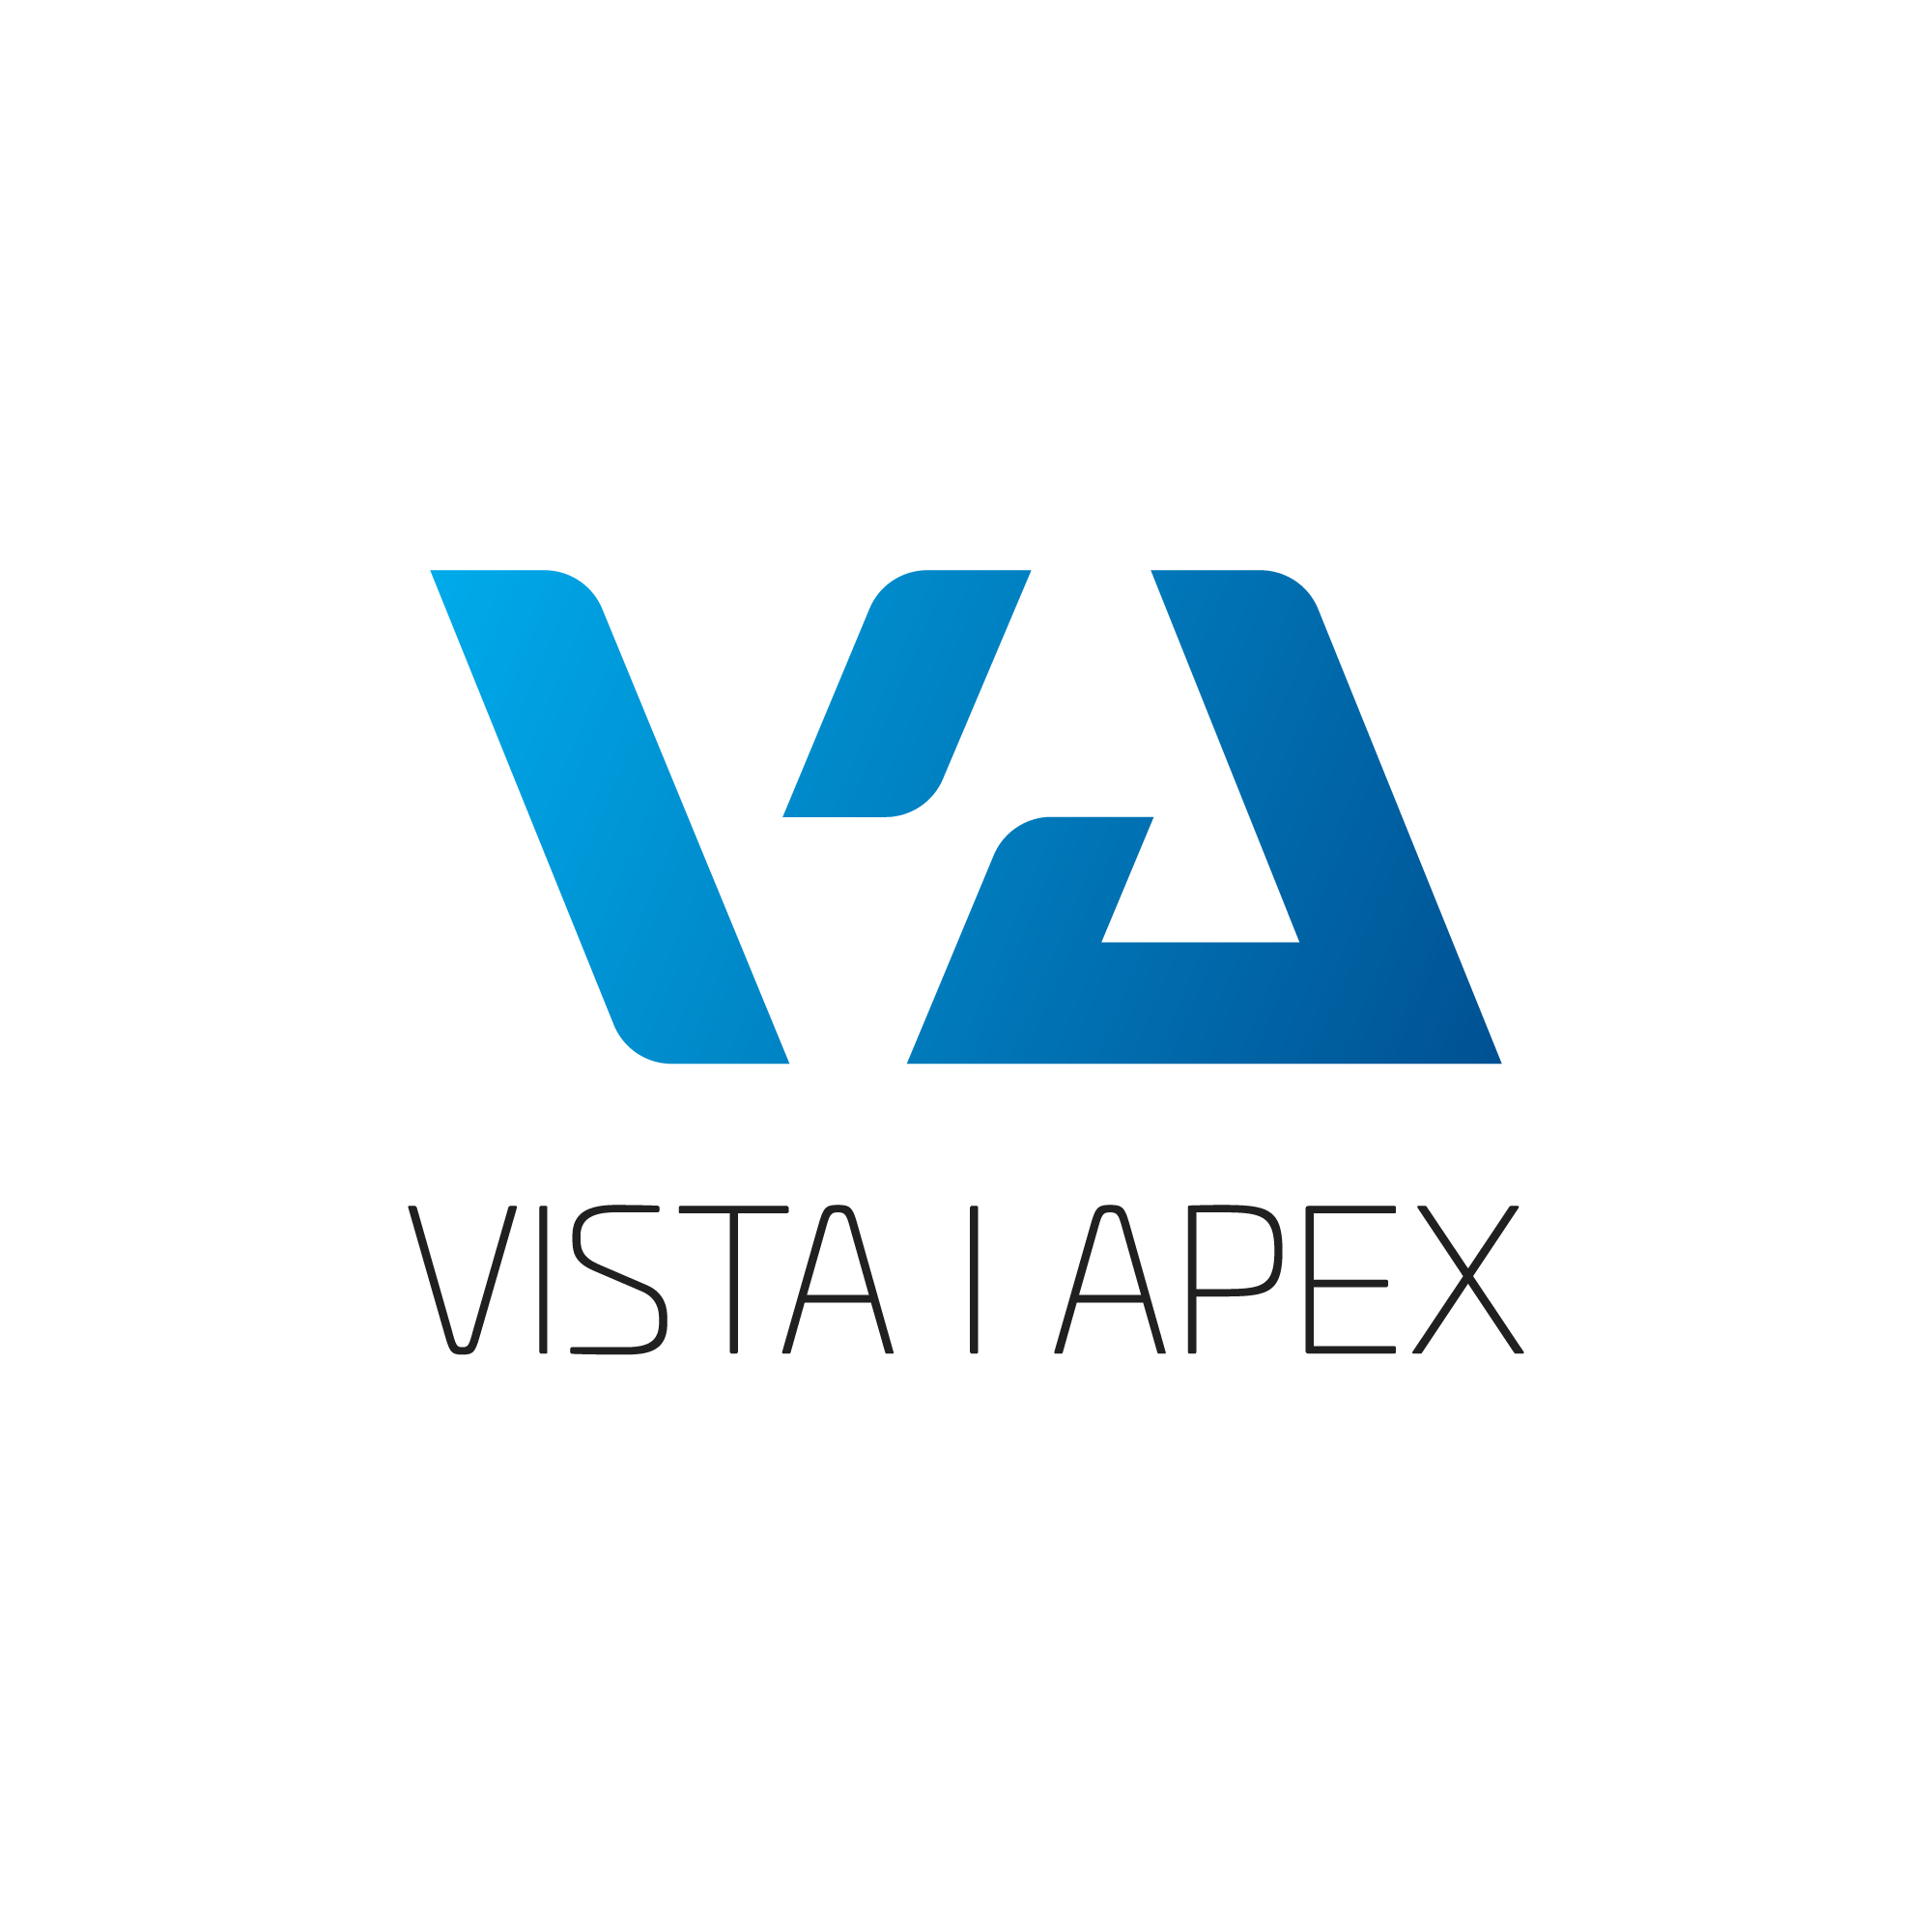 Curion (formerly, Bisco Canada) is proud to be authorized distributor of the Vista Apex Endodontics and restorative products in Canada. All Vista Apex products sold by Curion are backed by the manufacturers warranty.